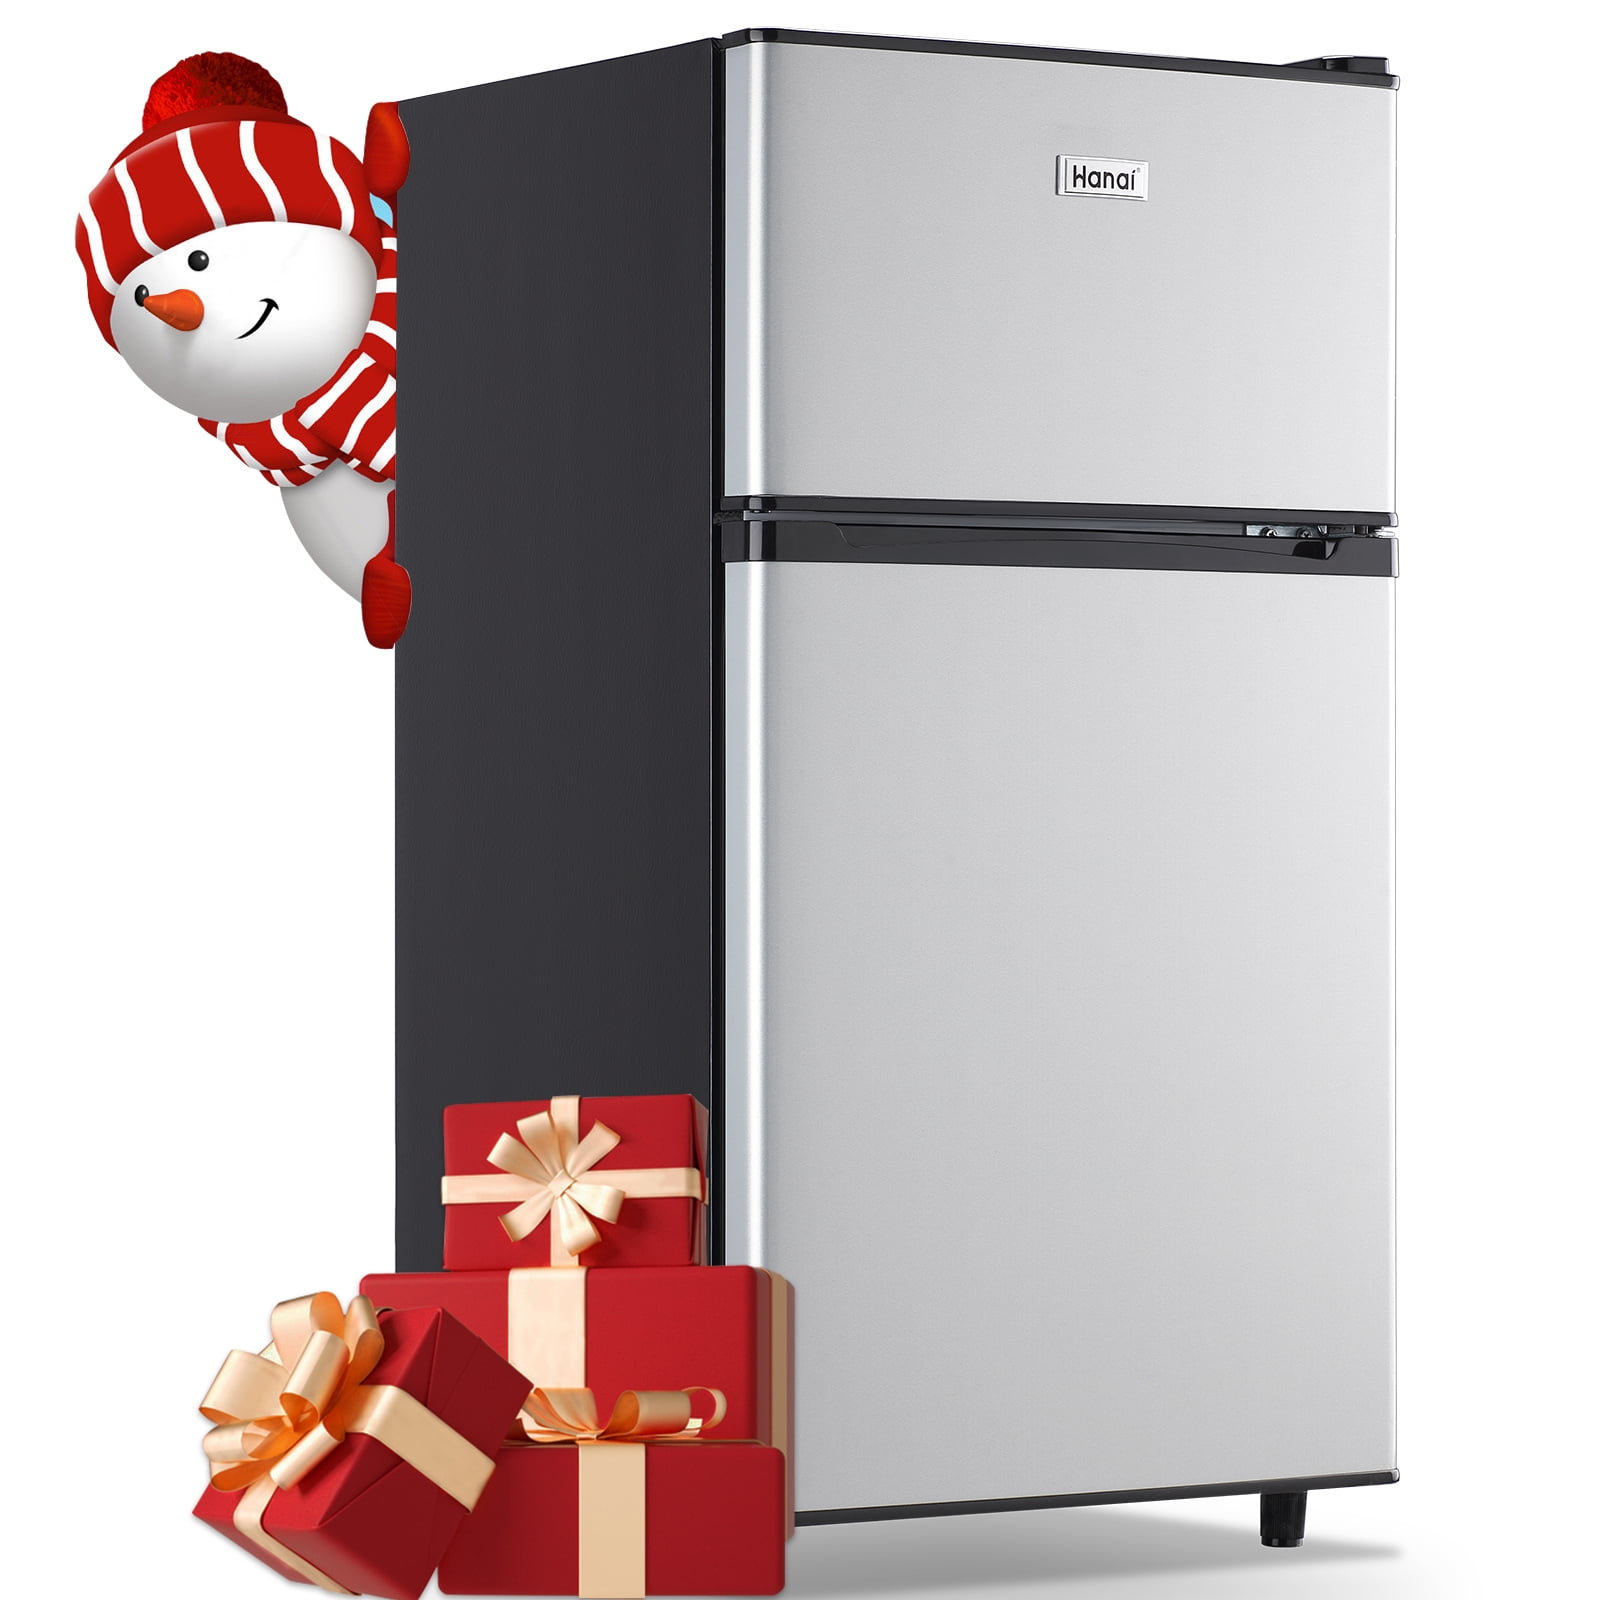  WANAI Mini Fridge with Freezer, 3.5 Cu.Ft Double Door Compact  Refrigerator Freezer-on-Top, Small Freestanding with 7 Adjustable  Thermostat for Bedroom Office Dorm Apartment, Silver : Appliances